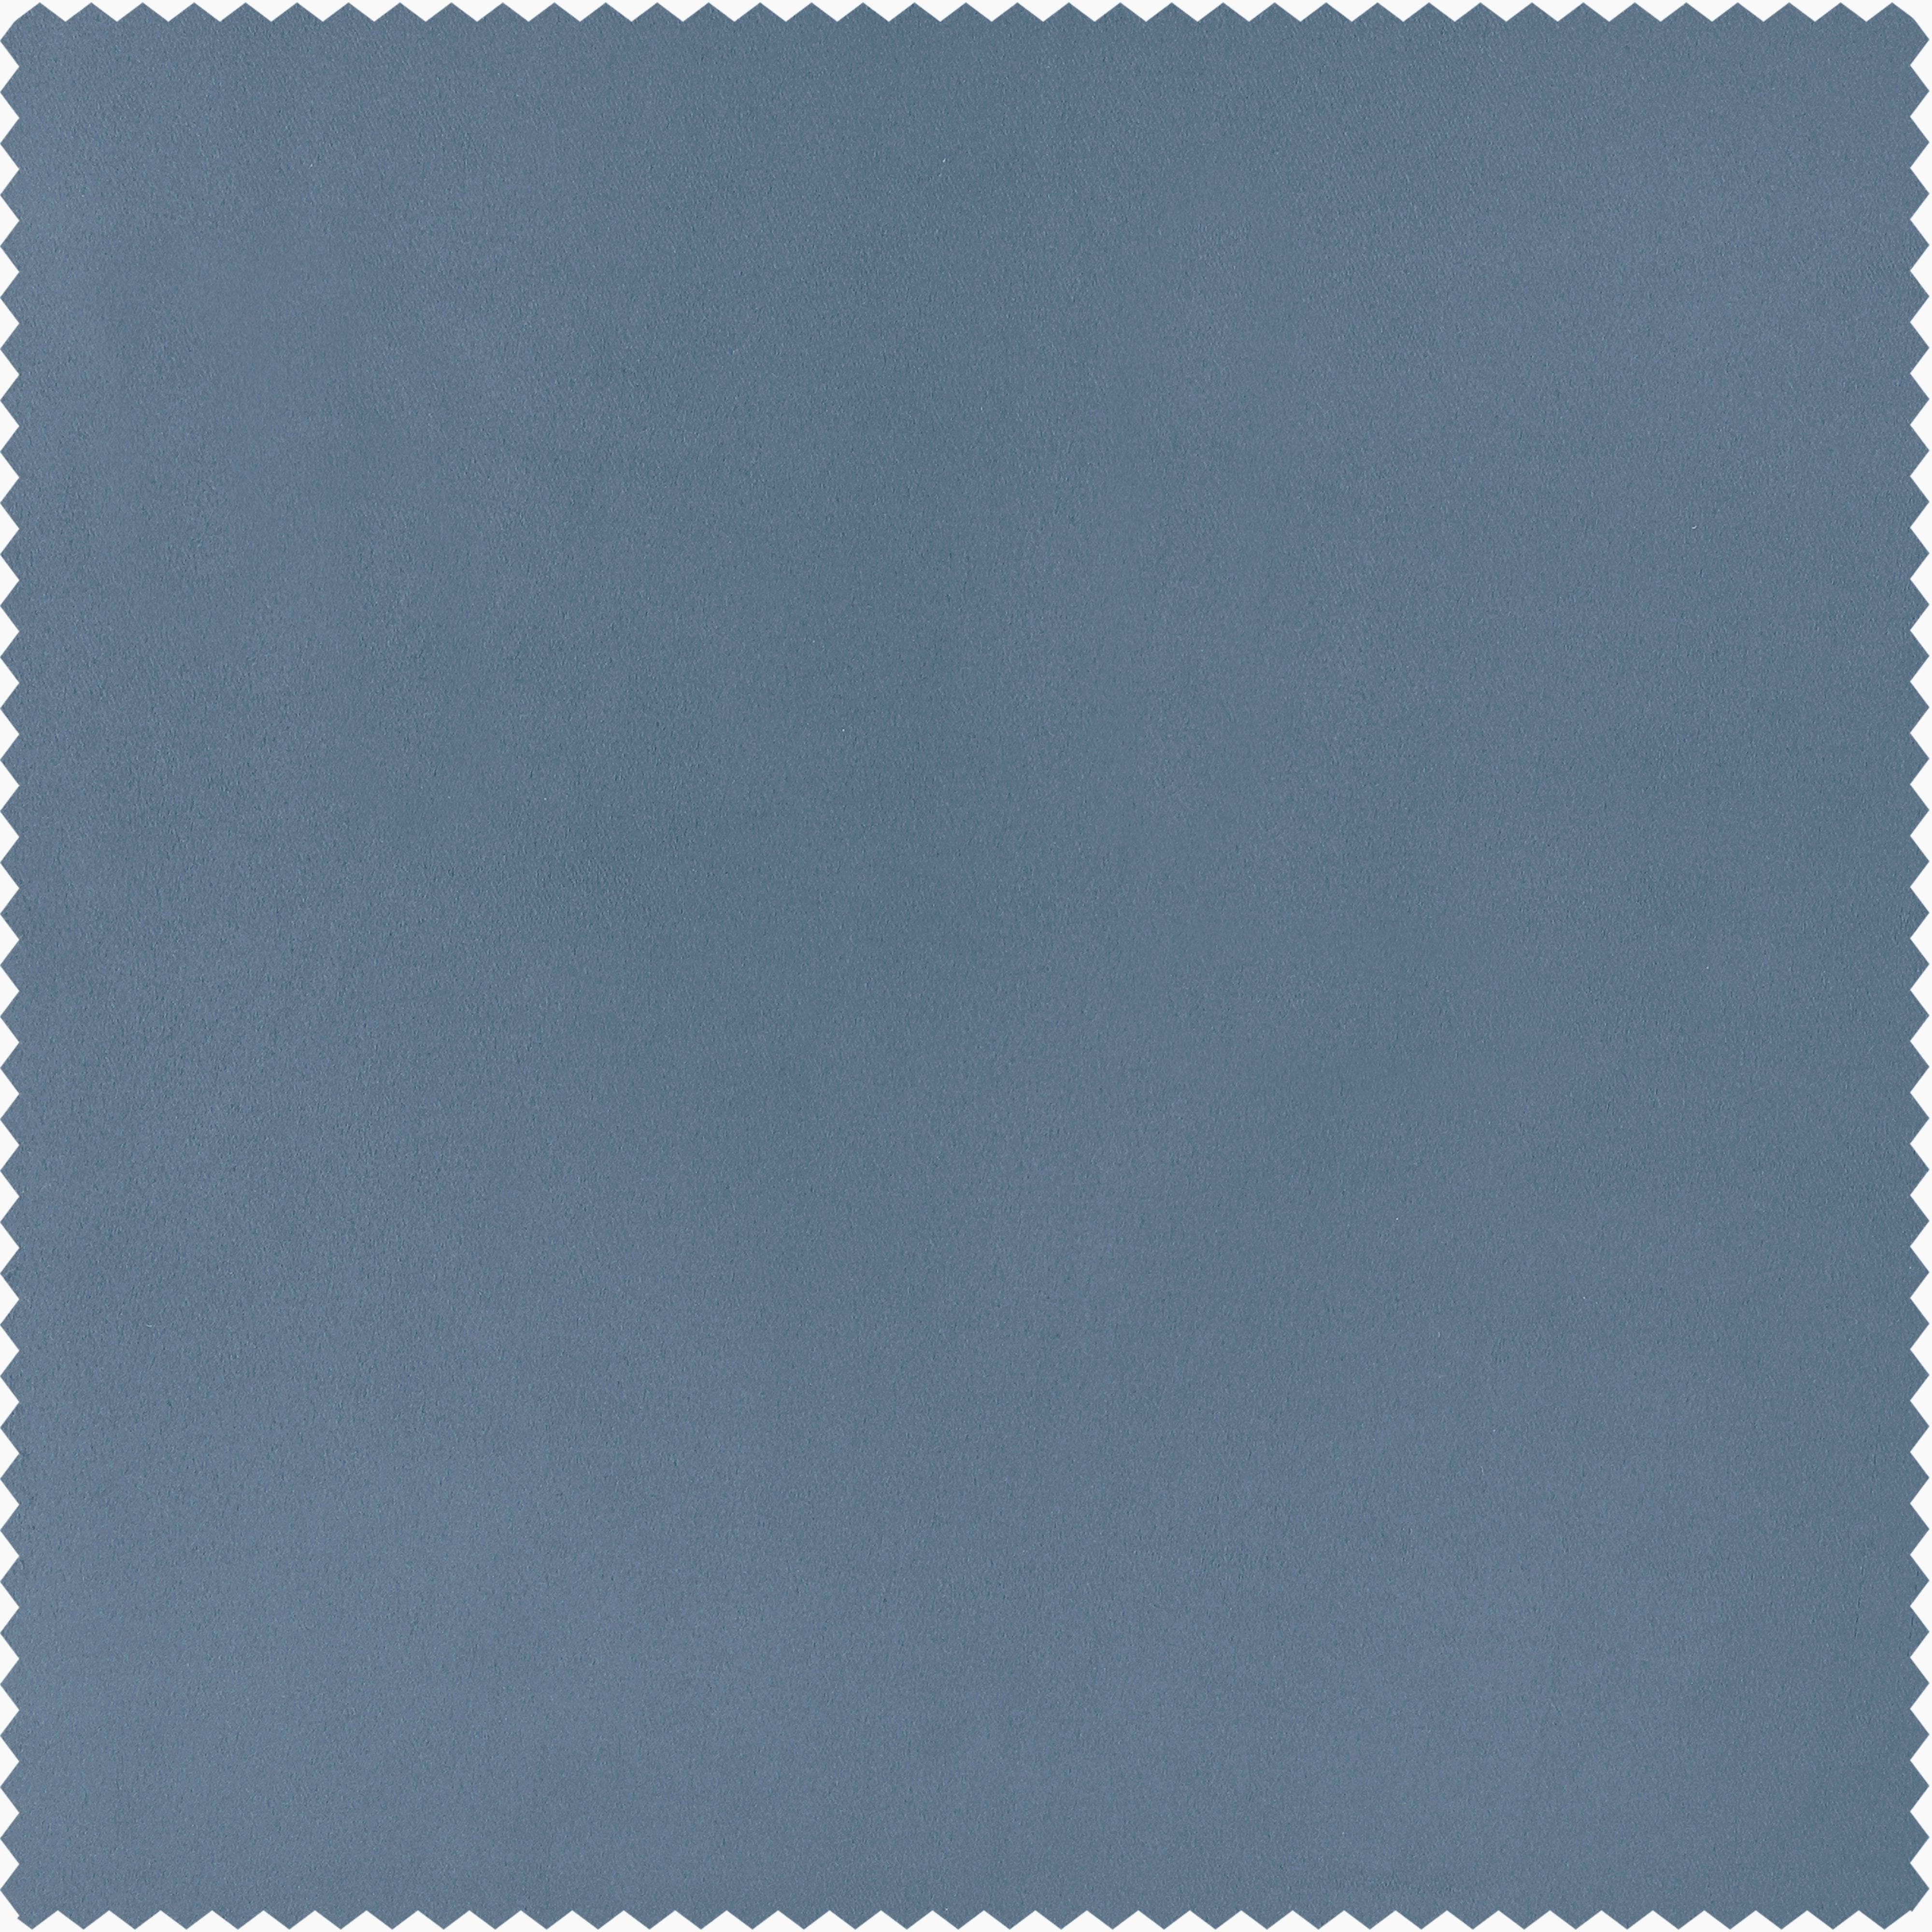 Poseidon Blue Solid Polyester Swatch